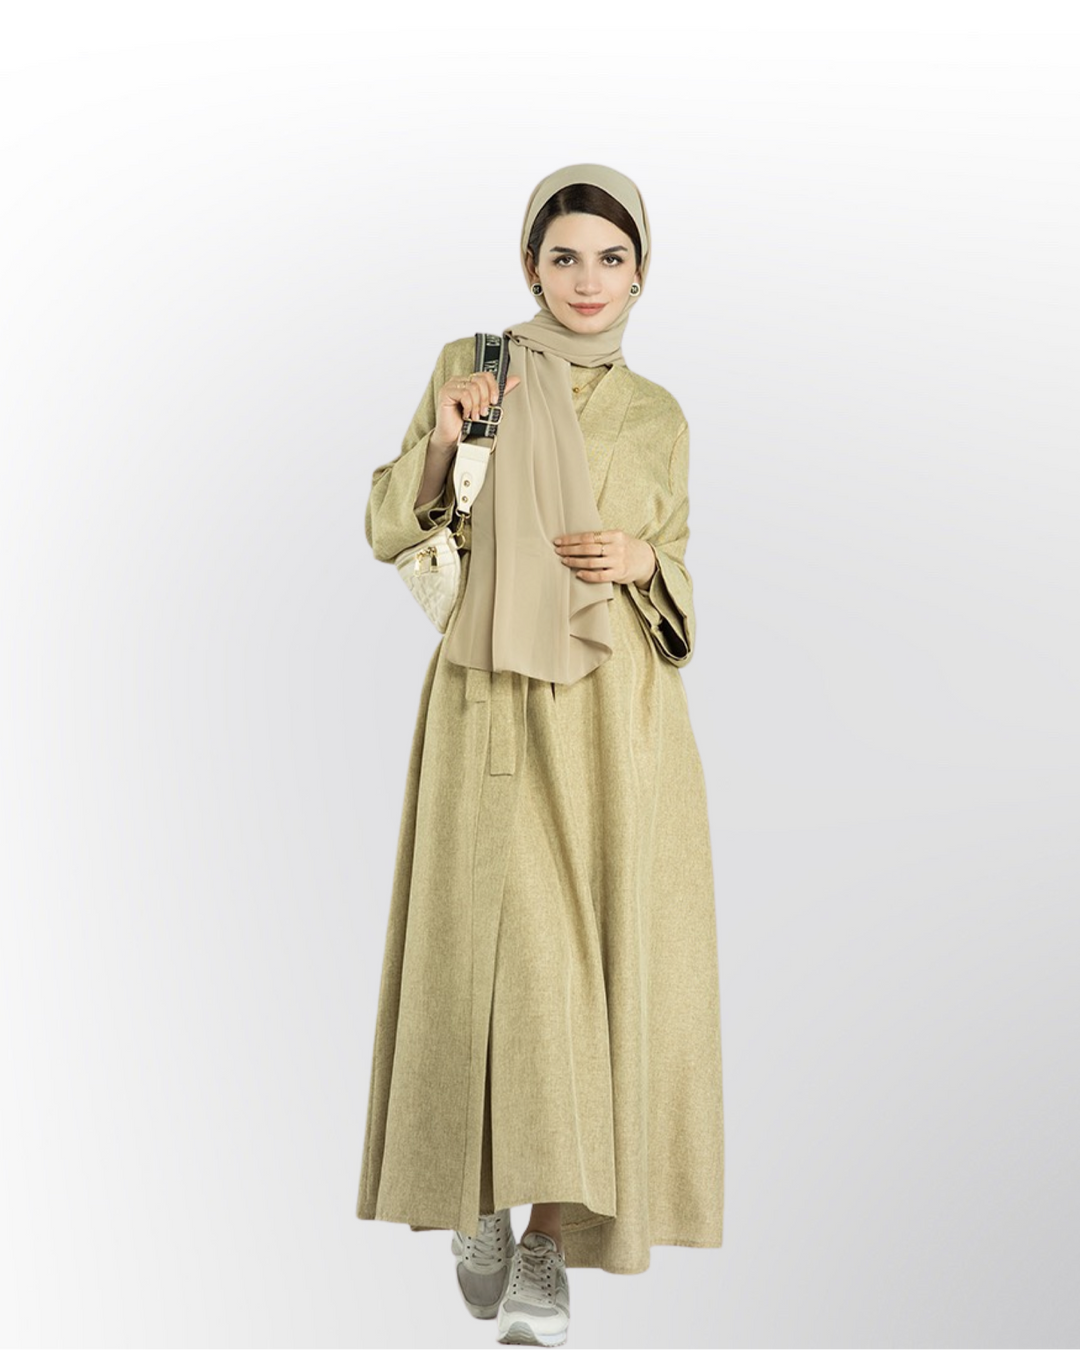 Get trendy with Elora Linen Set - Eggnog - Dresses available at Voilee NY. Grab yours for $99.90 today!